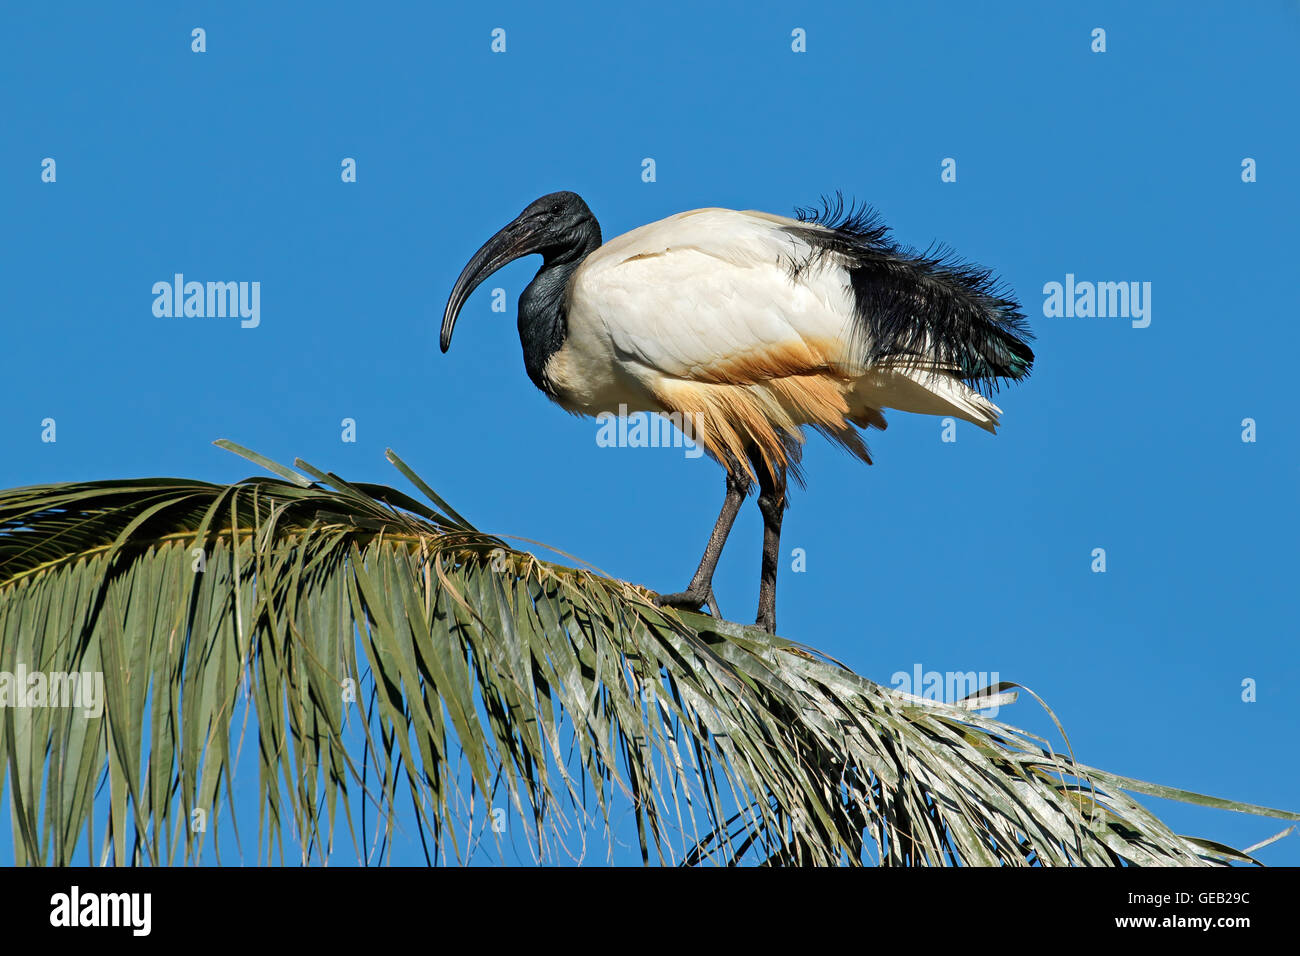 African sacred Ibis (Threskiornis aethiopicus) sitting in a palm tree, South Africa Stock Photo